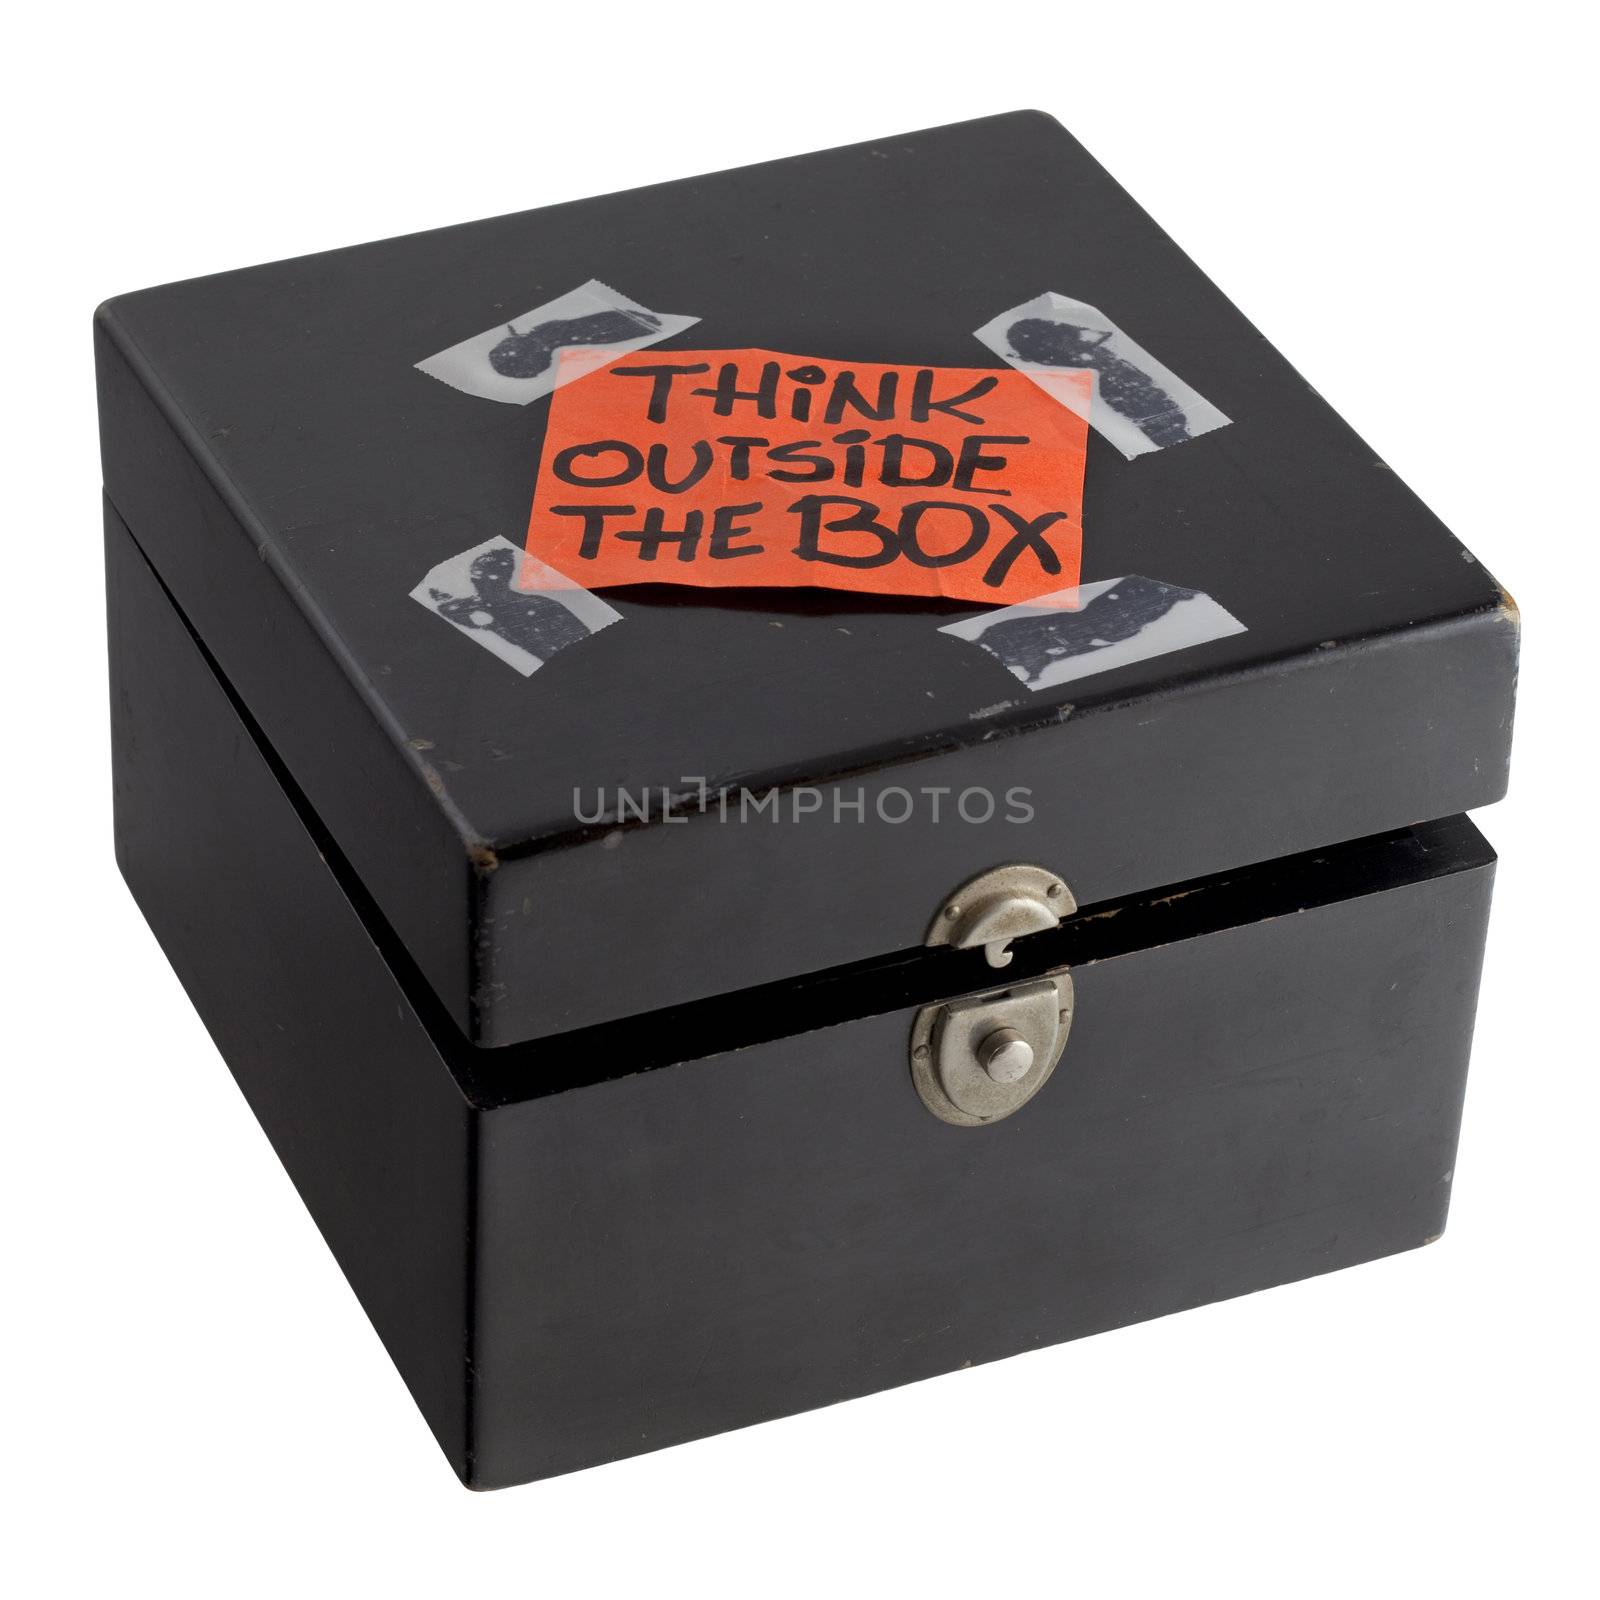 think outside the box - orange label (reminder note) casually taped on top of old black painted wooden box with dents and scratches, isolated on white with clipping path